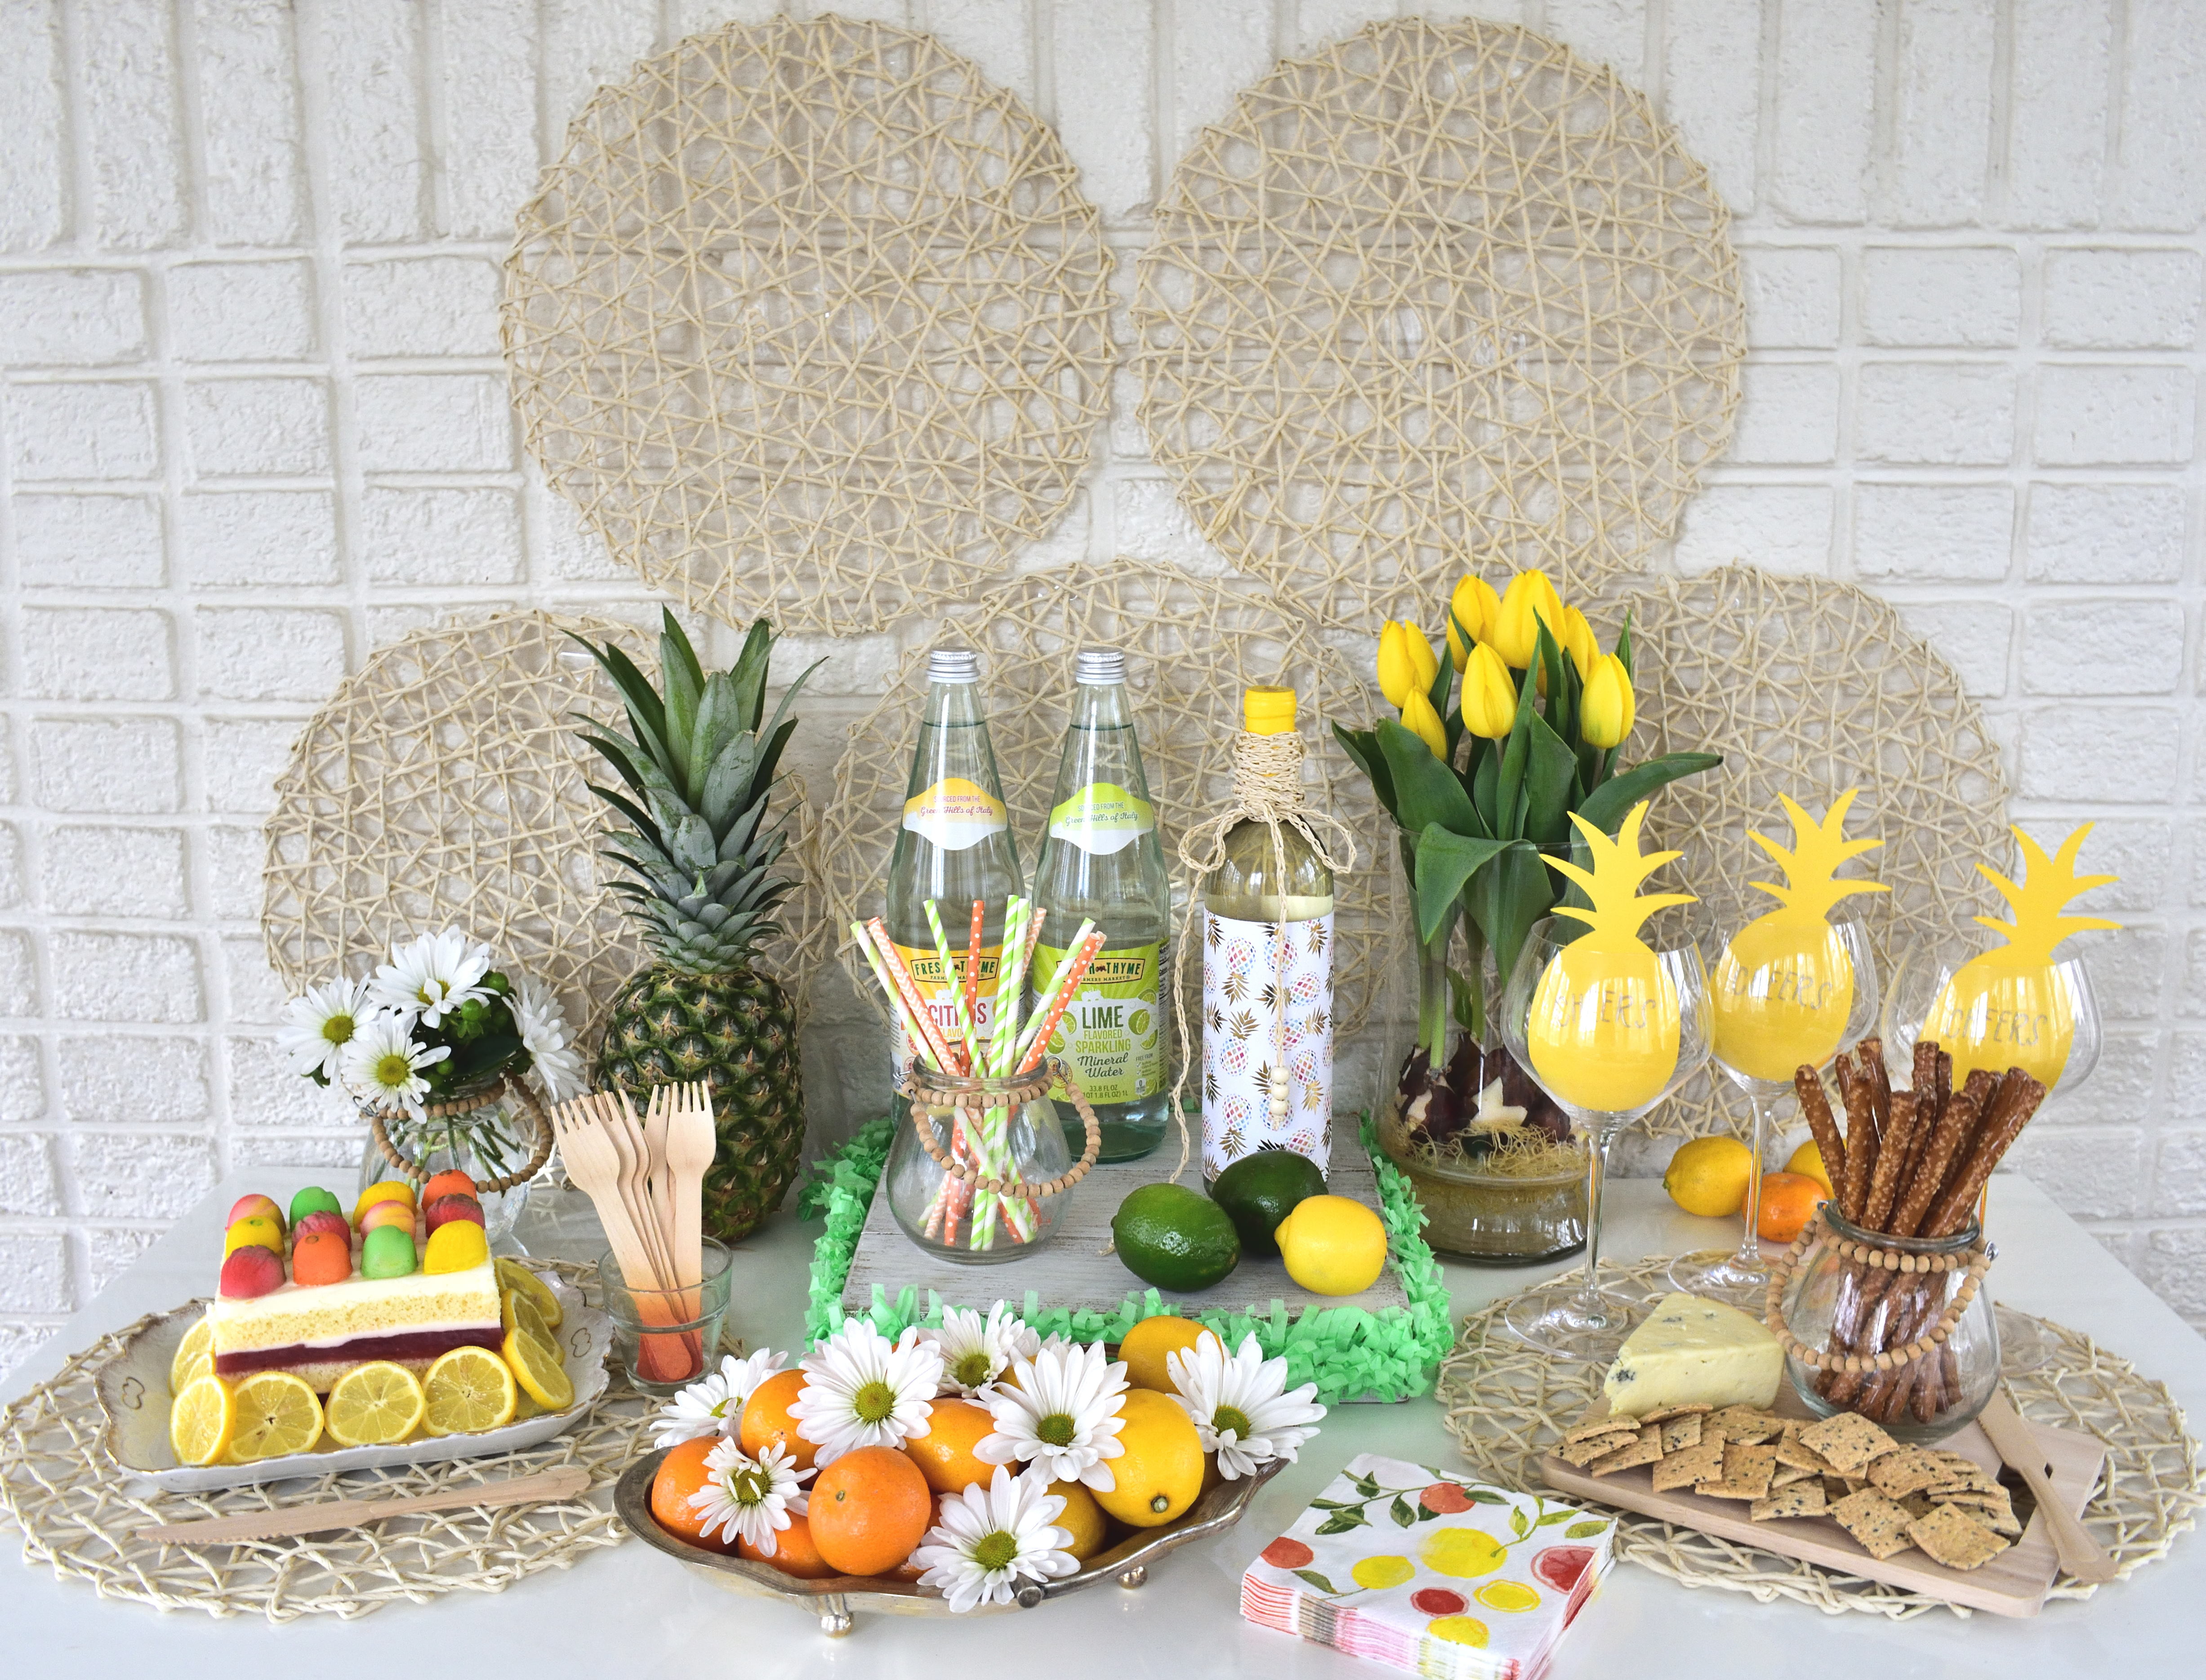 Cocktail party ideas and inspiration for springtime celebrations!